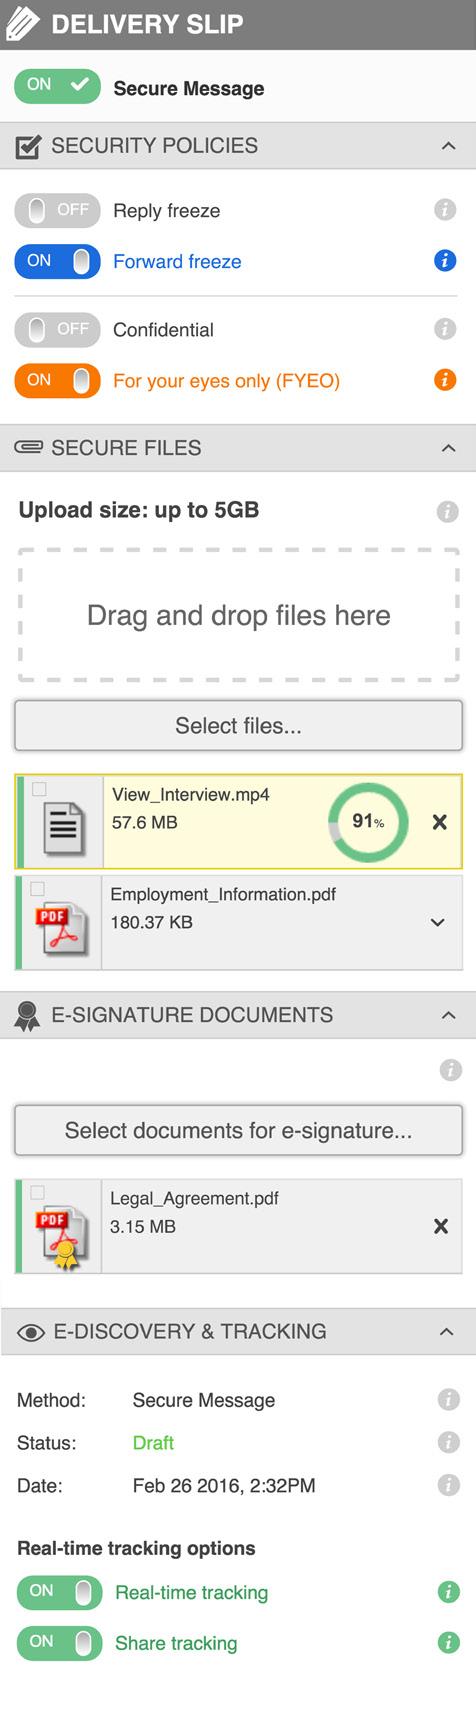 Share files up to 5GB securely from any device, regardless of other limits in place.